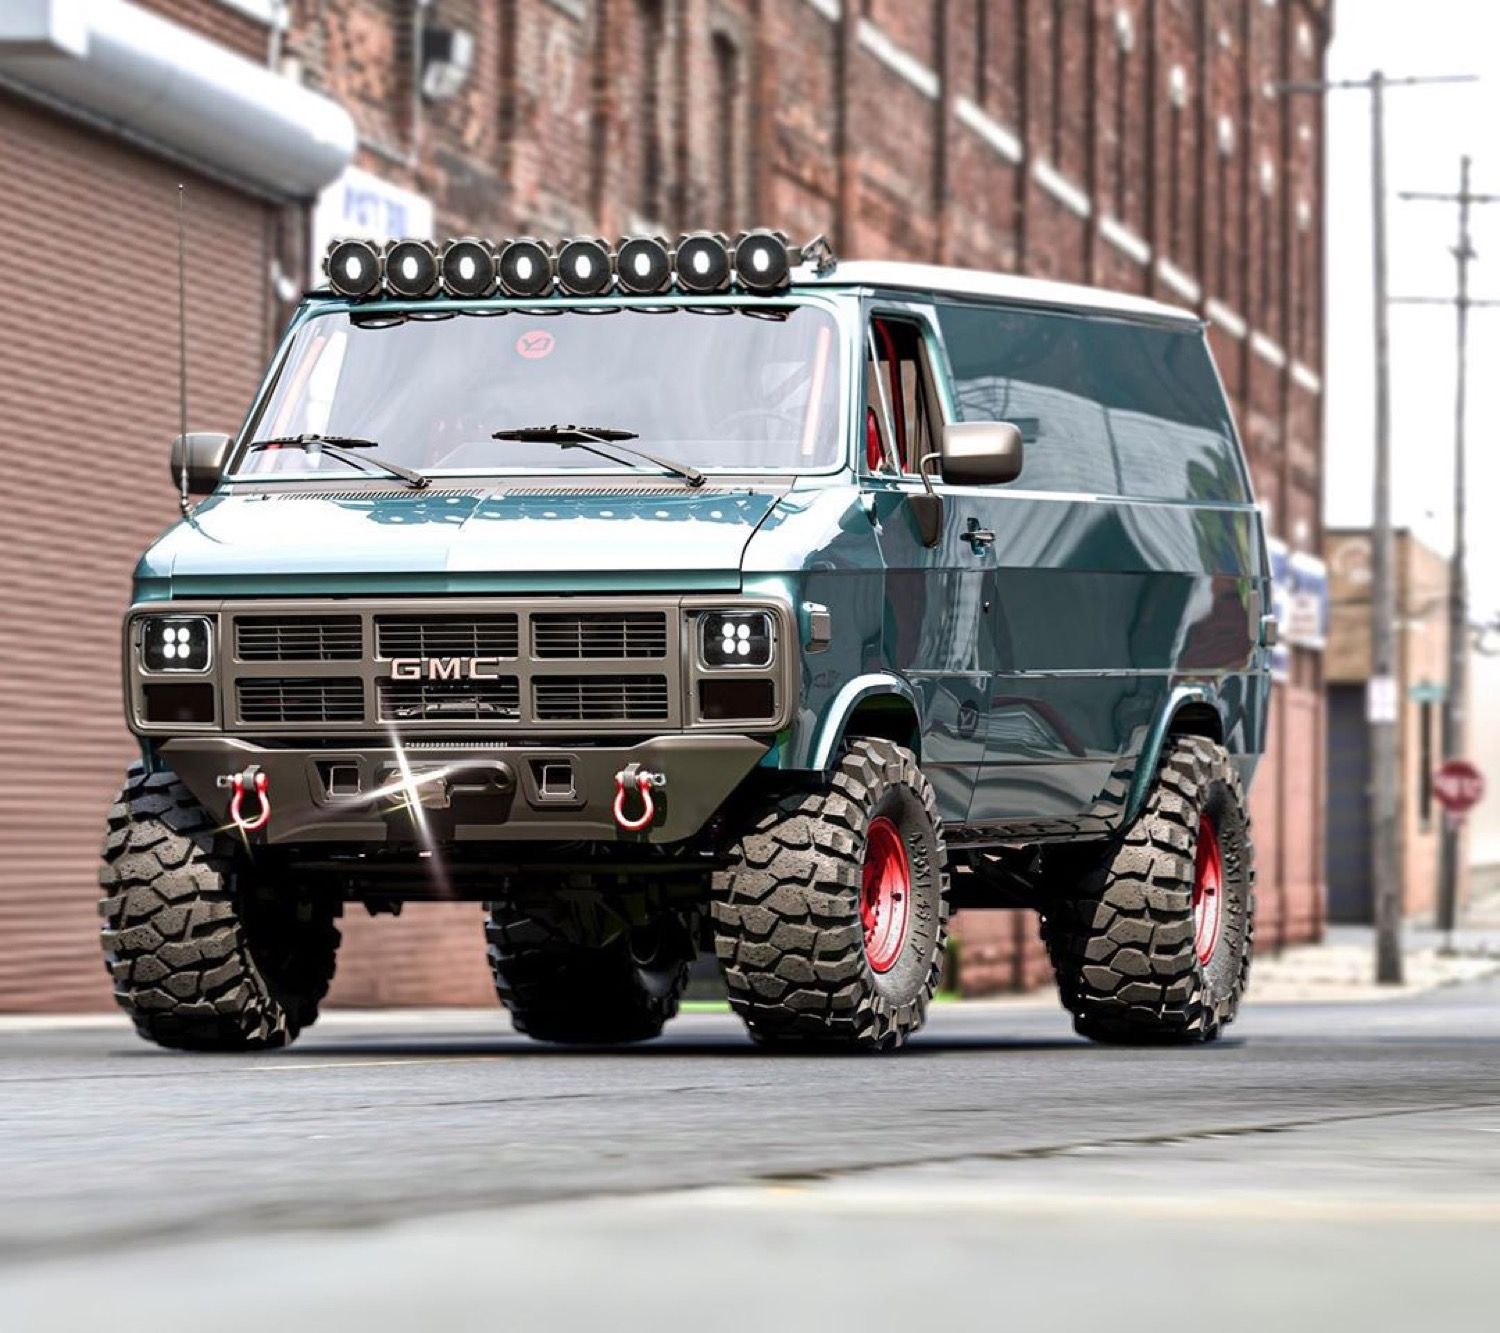 This Lifted Off Road Gmc Vandura Would Satisfy Every Dream You Had In The 1980s